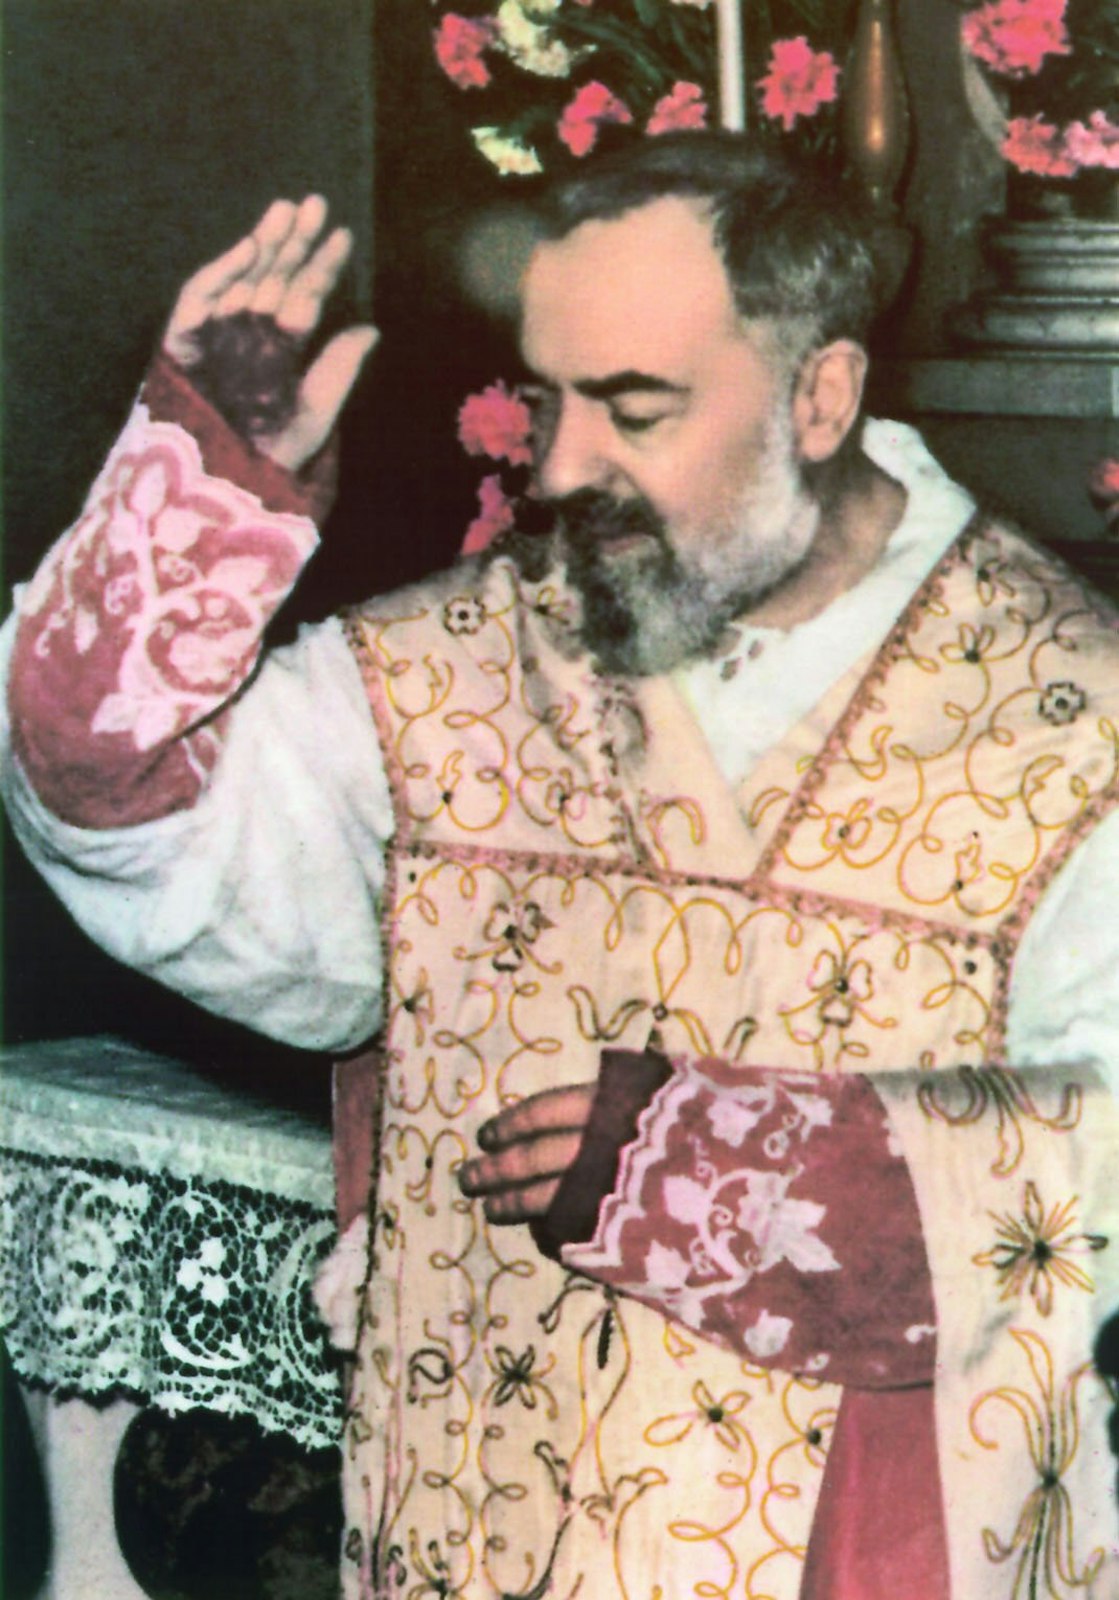 Padre Pio holds up his hand that appears to be bloodied in this undated file photo. During his lifetime, Padre Pio's stigmata was questioned or contested by some church authorities. (CNS file photo)